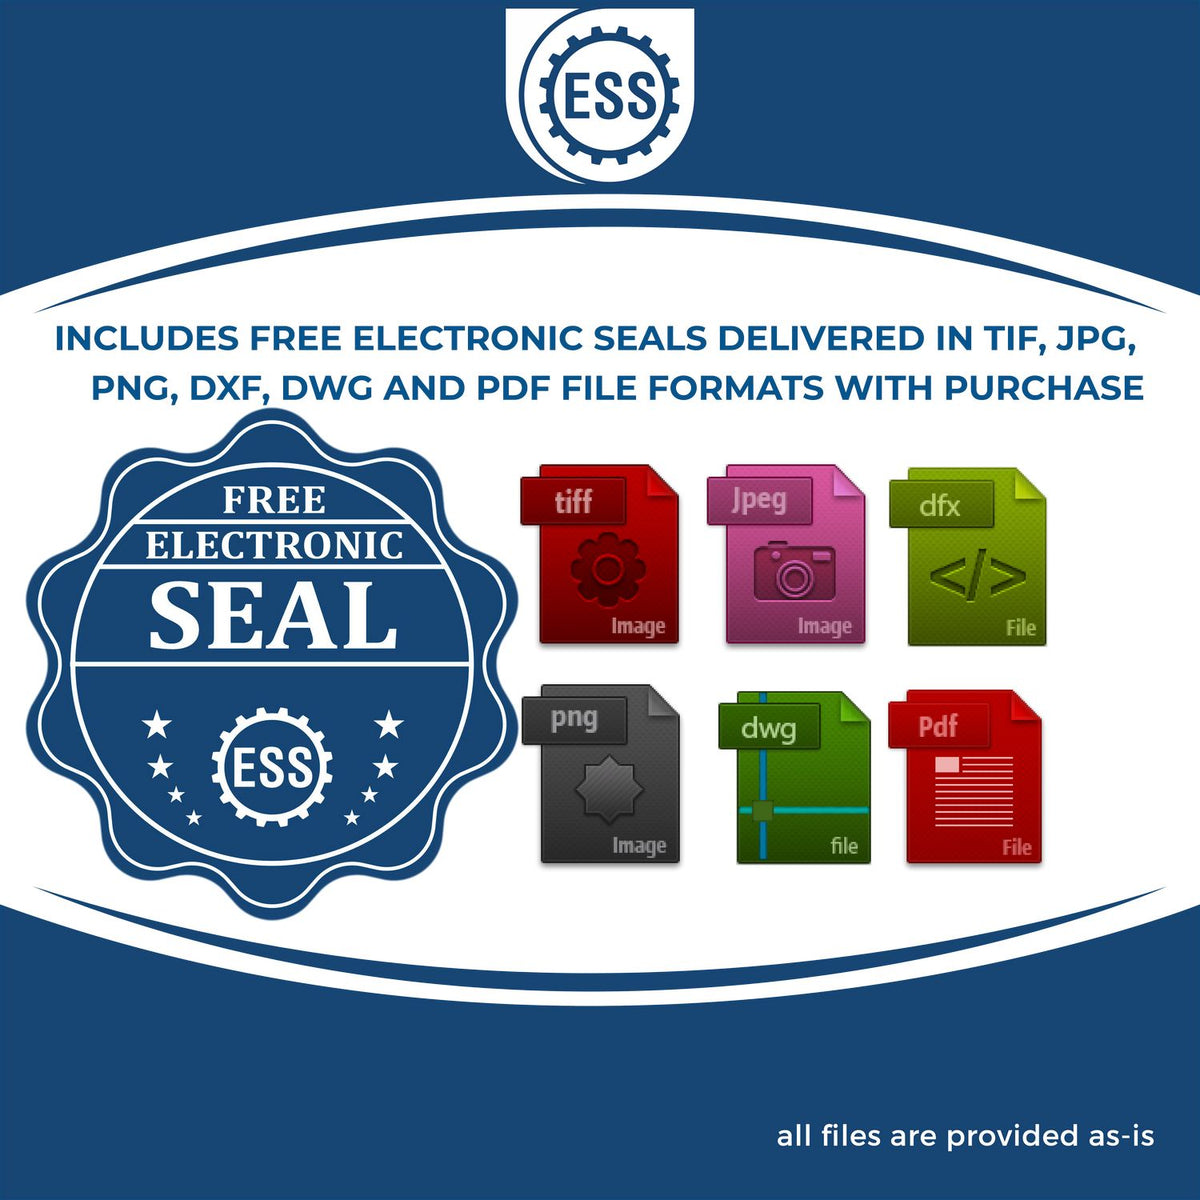 An infographic for the free electronic seal for the Slim Pre-Inked Oregon Professional Geologist Seal Stamp illustrating the different file type icons such as DXF, DWG, TIF, JPG and PNG.